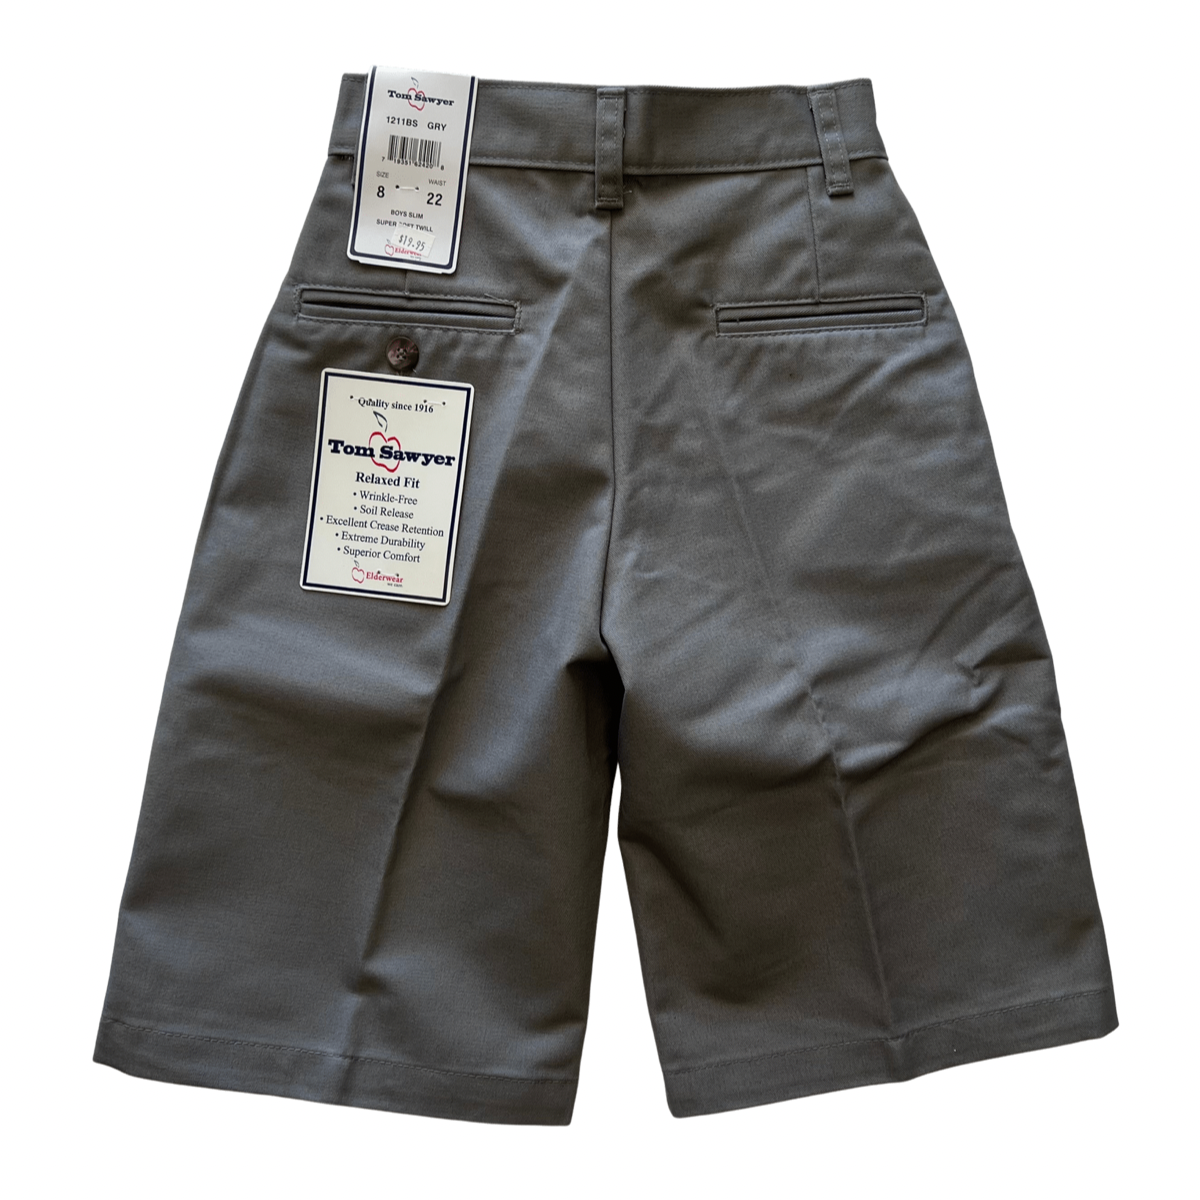 Clearance - Tom Sawyer Boy's Grey Flat Front Short - SLIM SIZES ONLY